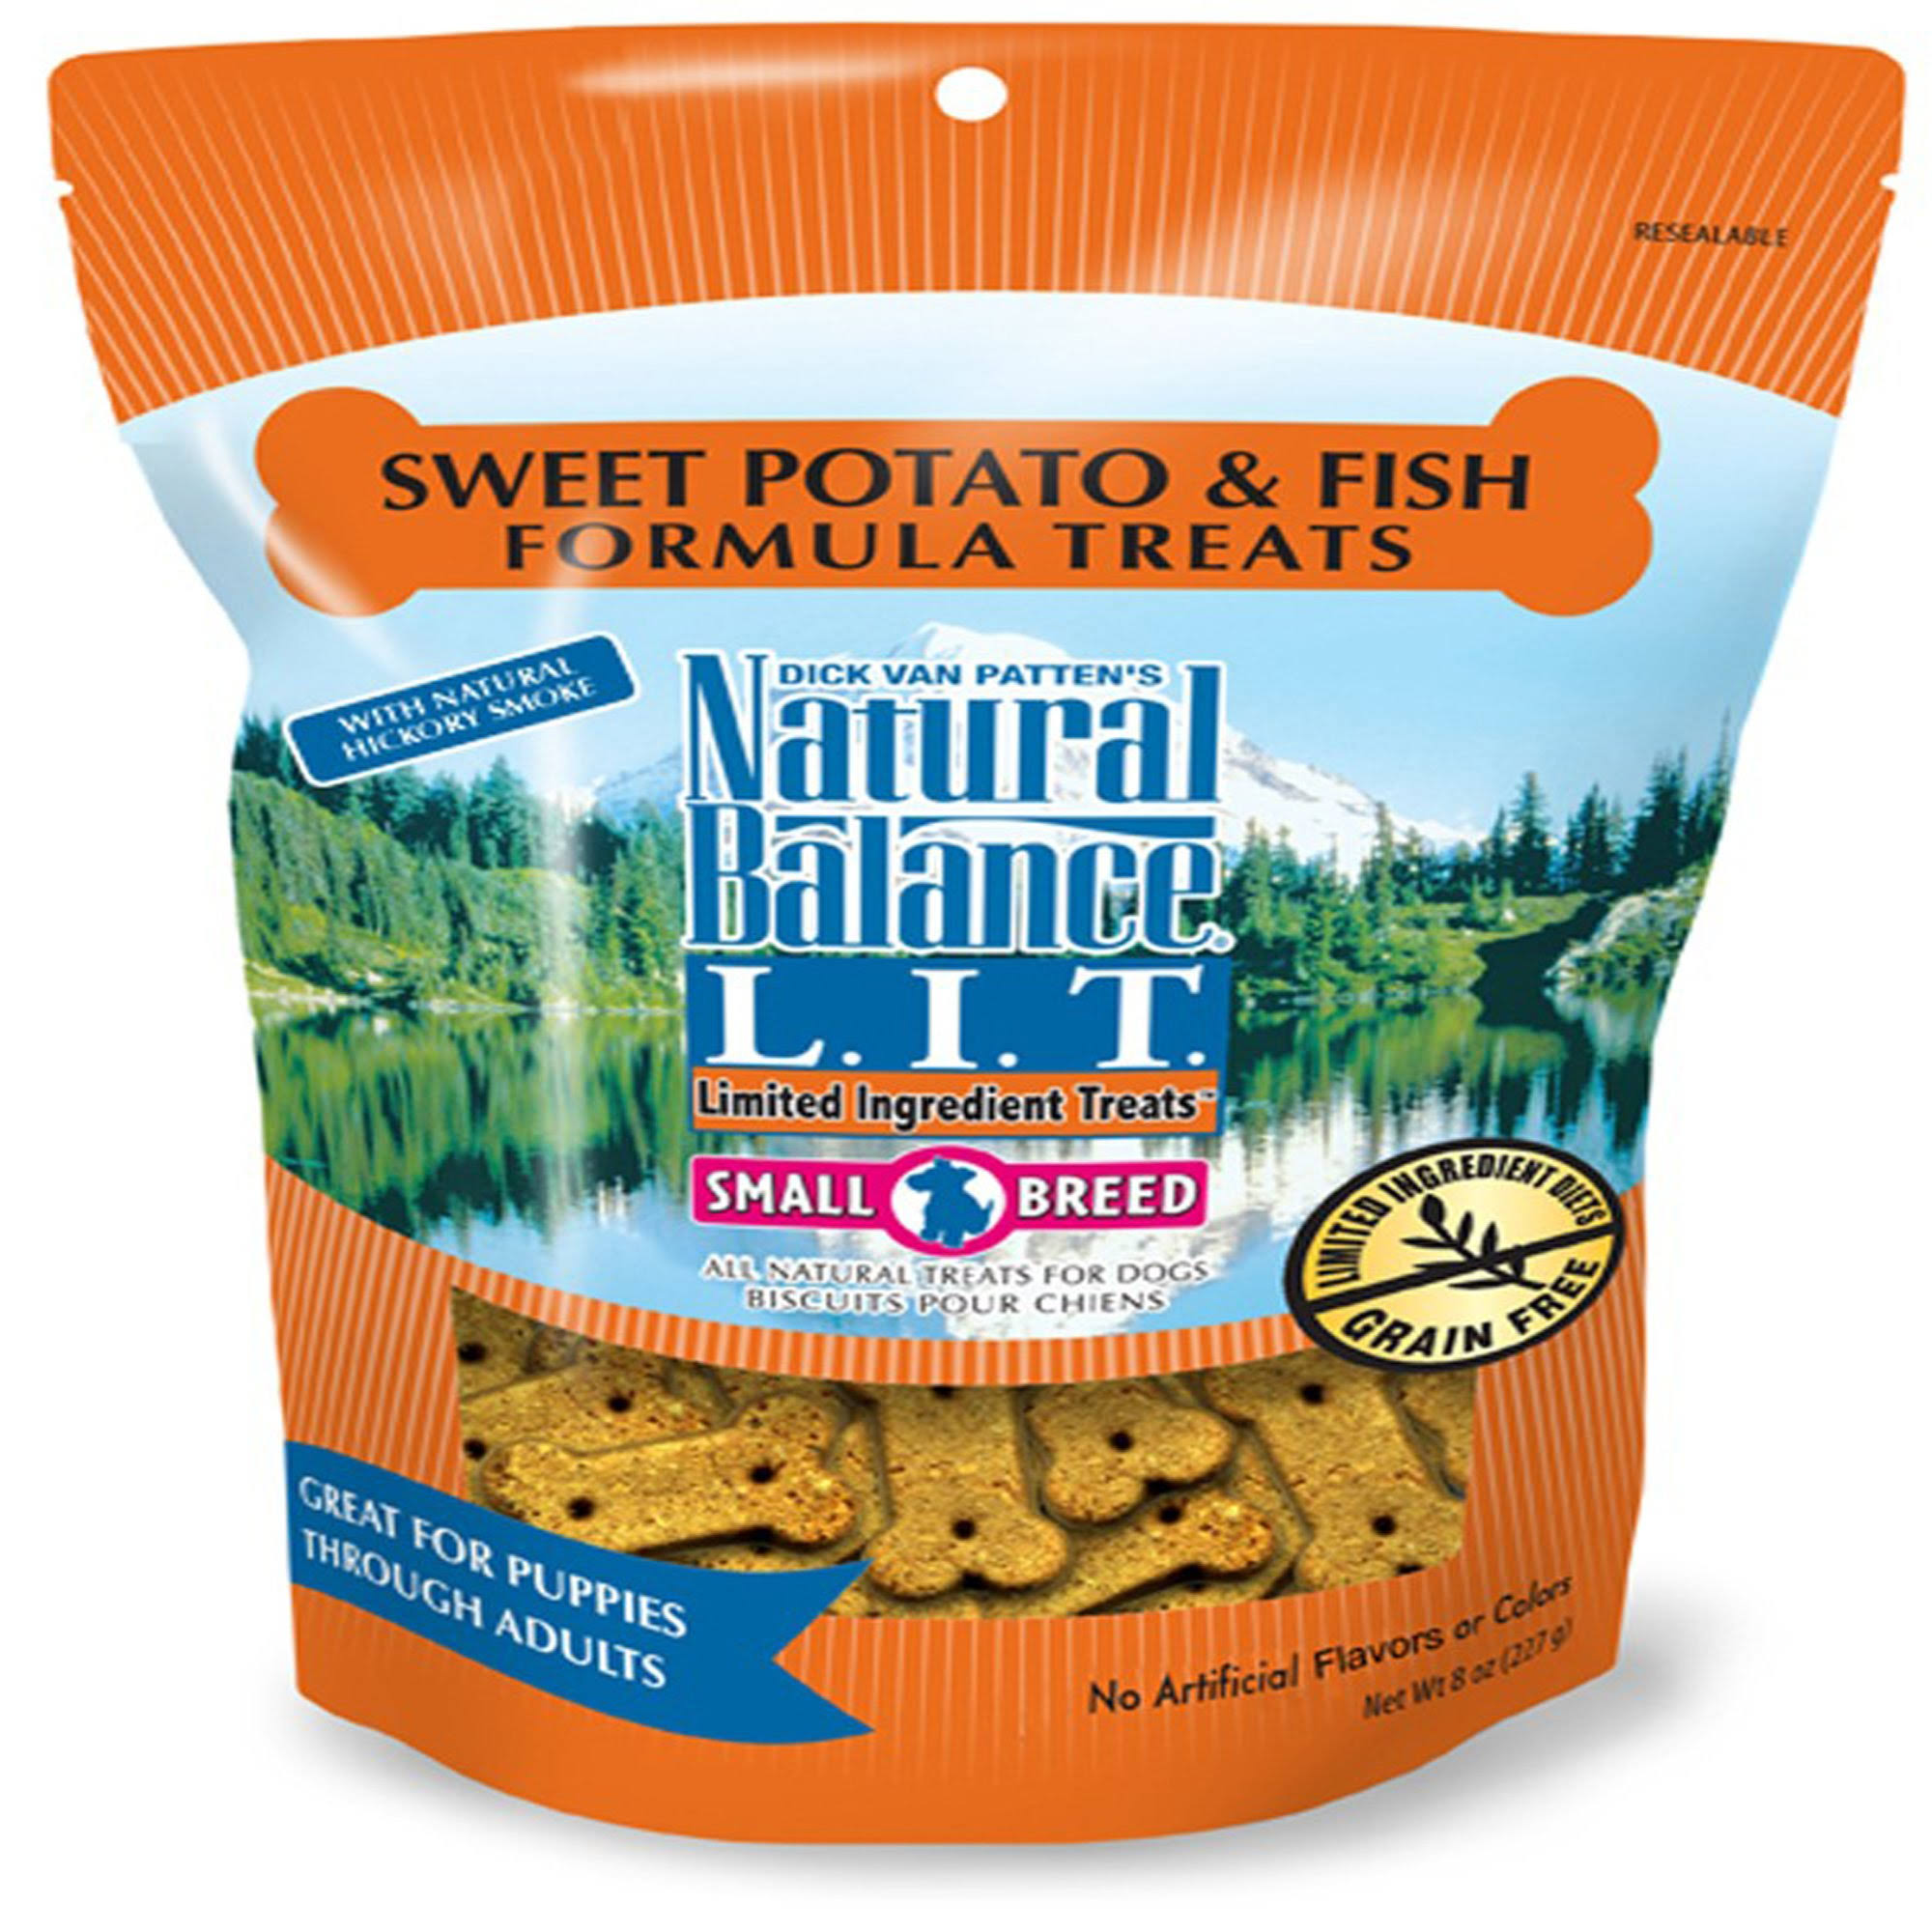 Natural Balance L.I.D. Limited Ingredient Diets Treats for Dogs, Grain Free, Sweet Potato & Fish Formula, Original Biscuits, Small Breed - 8 oz